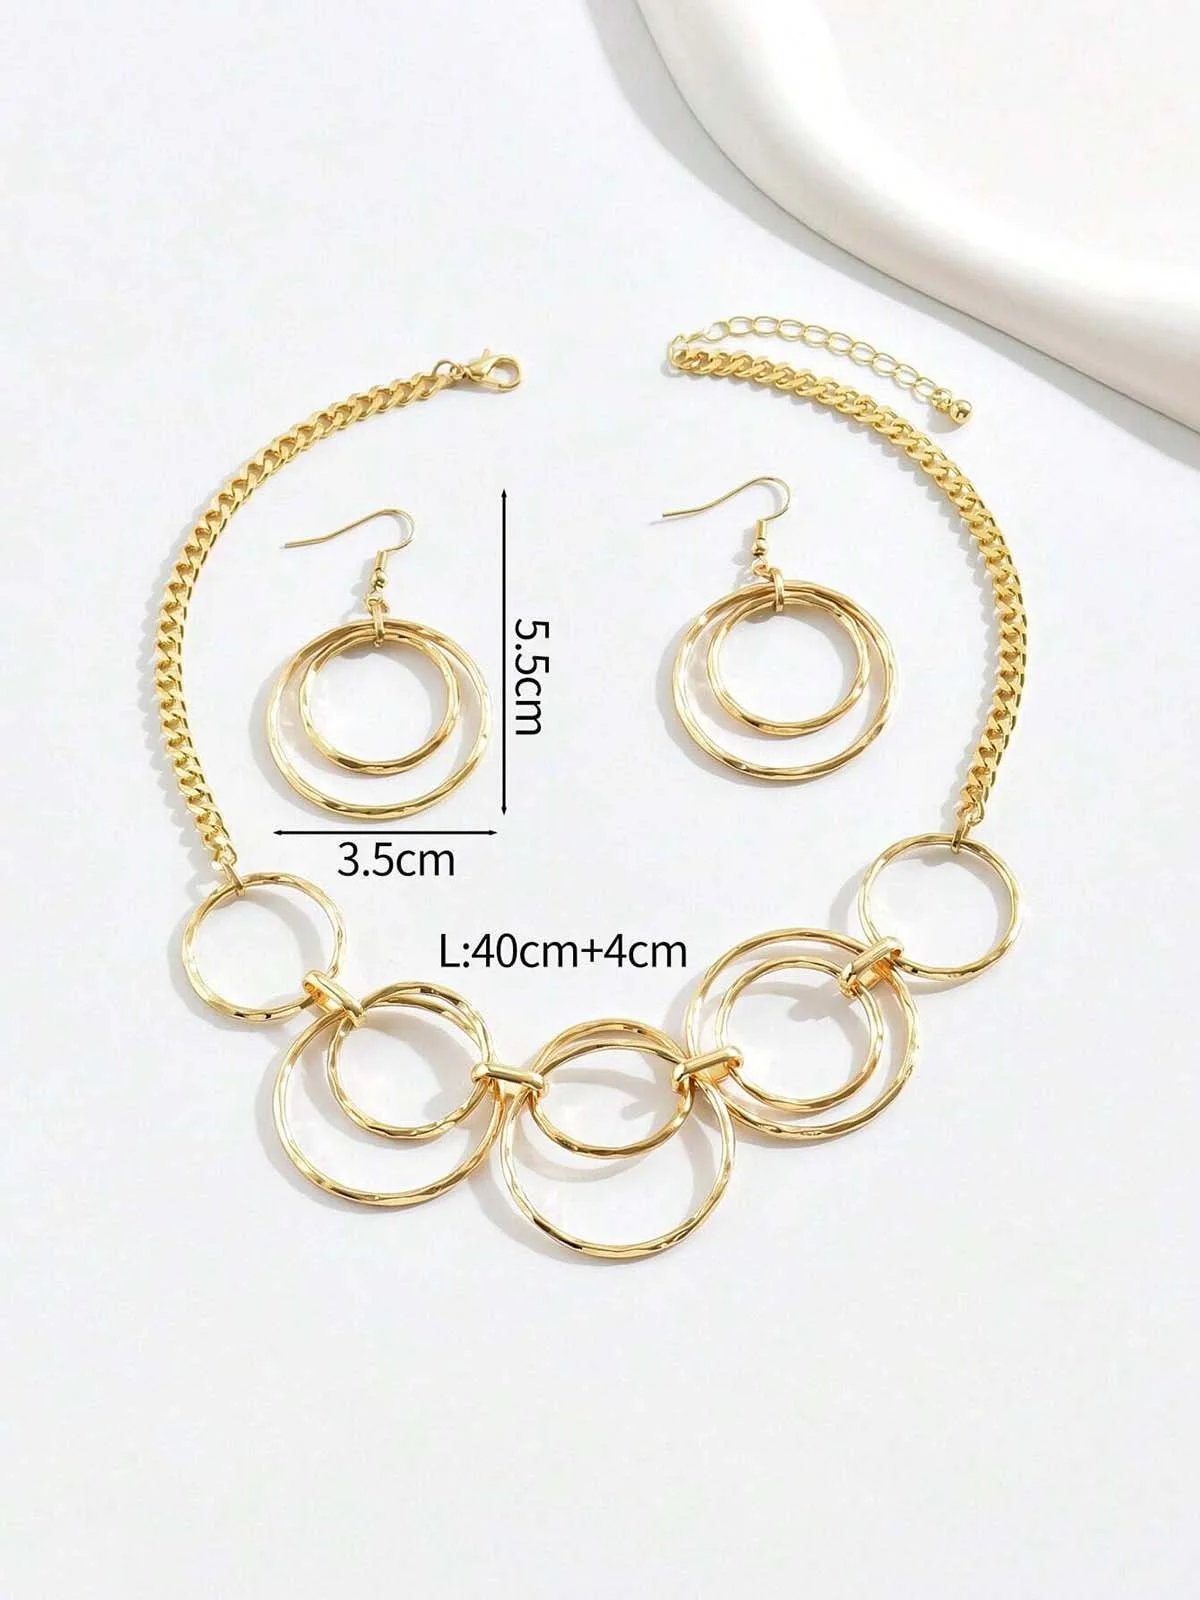 2pcs/set Fashionable Round Pendant Necklace And Earrings